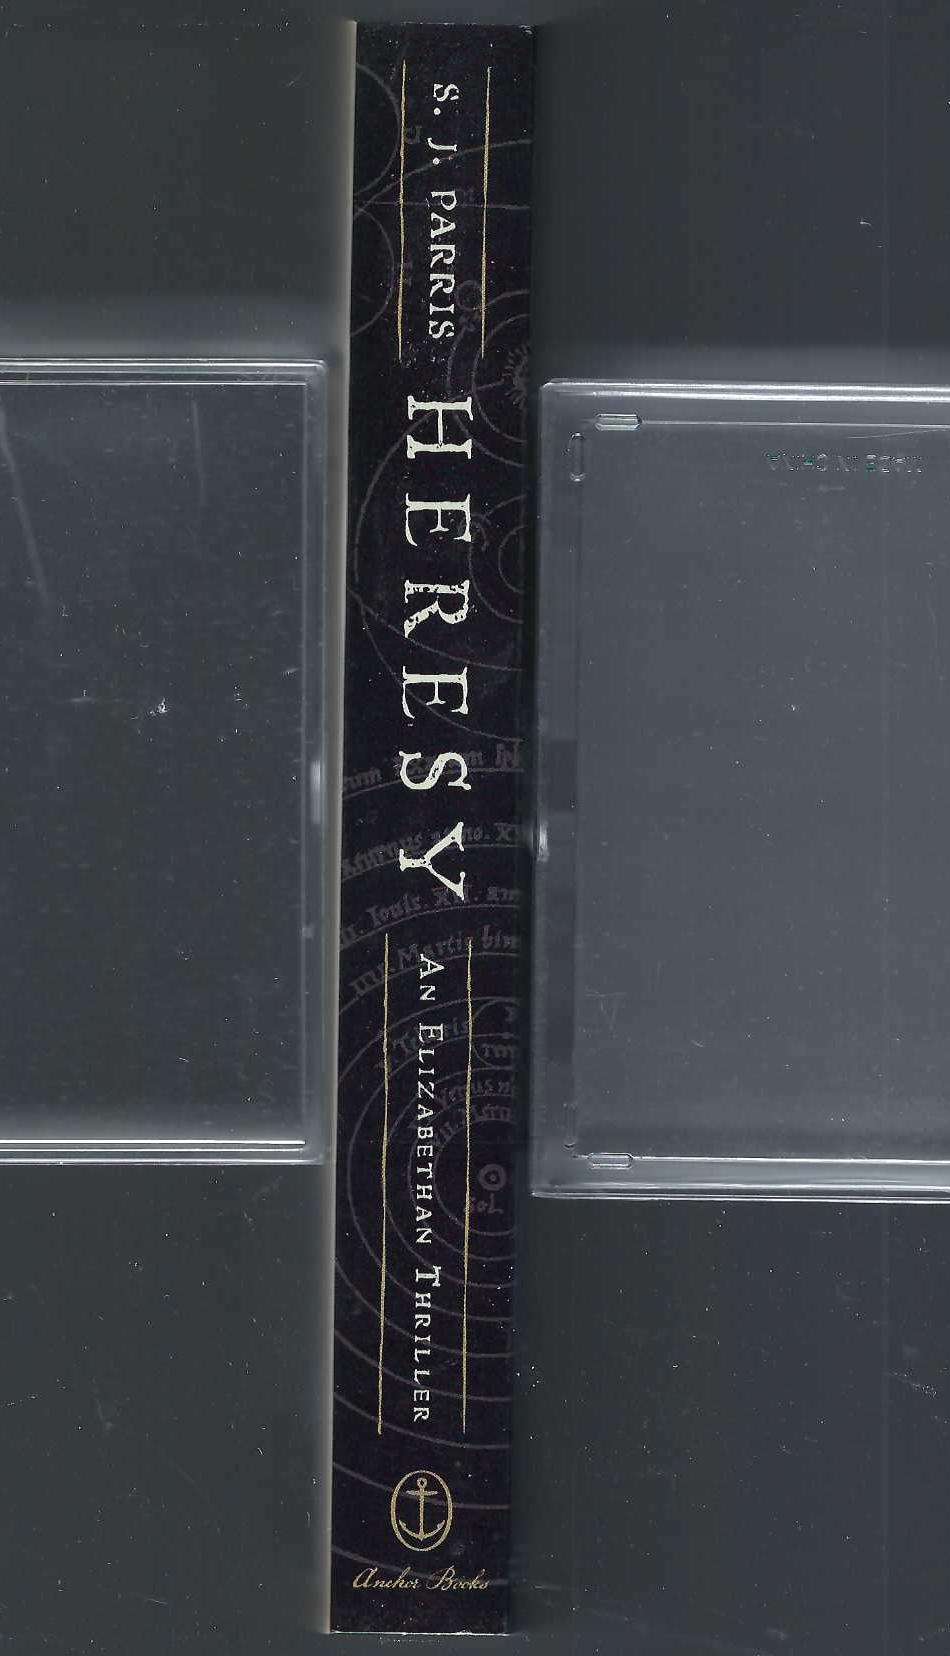 Heresy by S. J. Parris spine